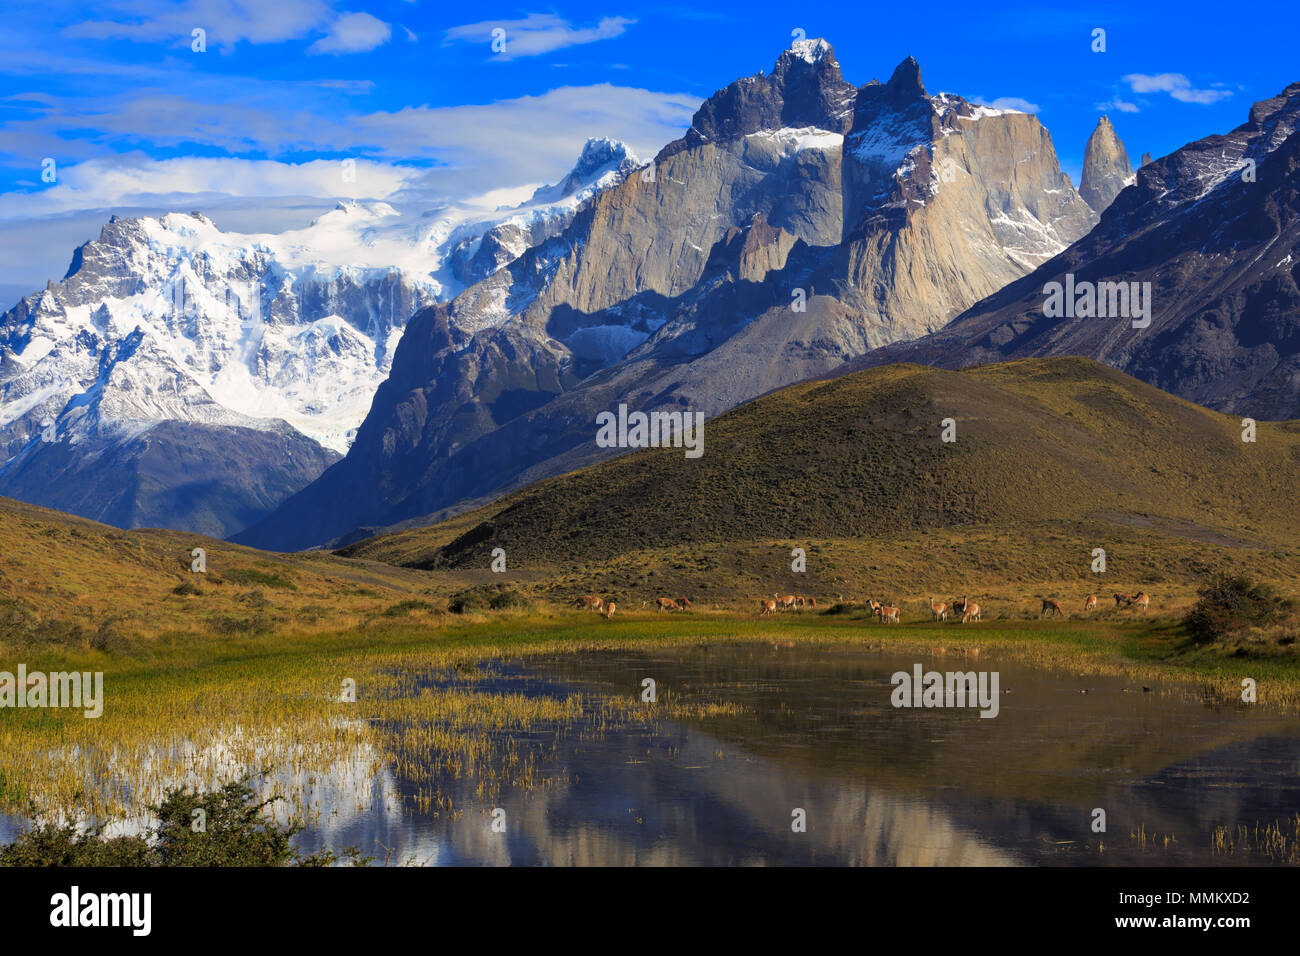 Torres del Paine National Park, Patagonia, Chile. Guanacos graze at the edge of a lagoon. Stock Photo